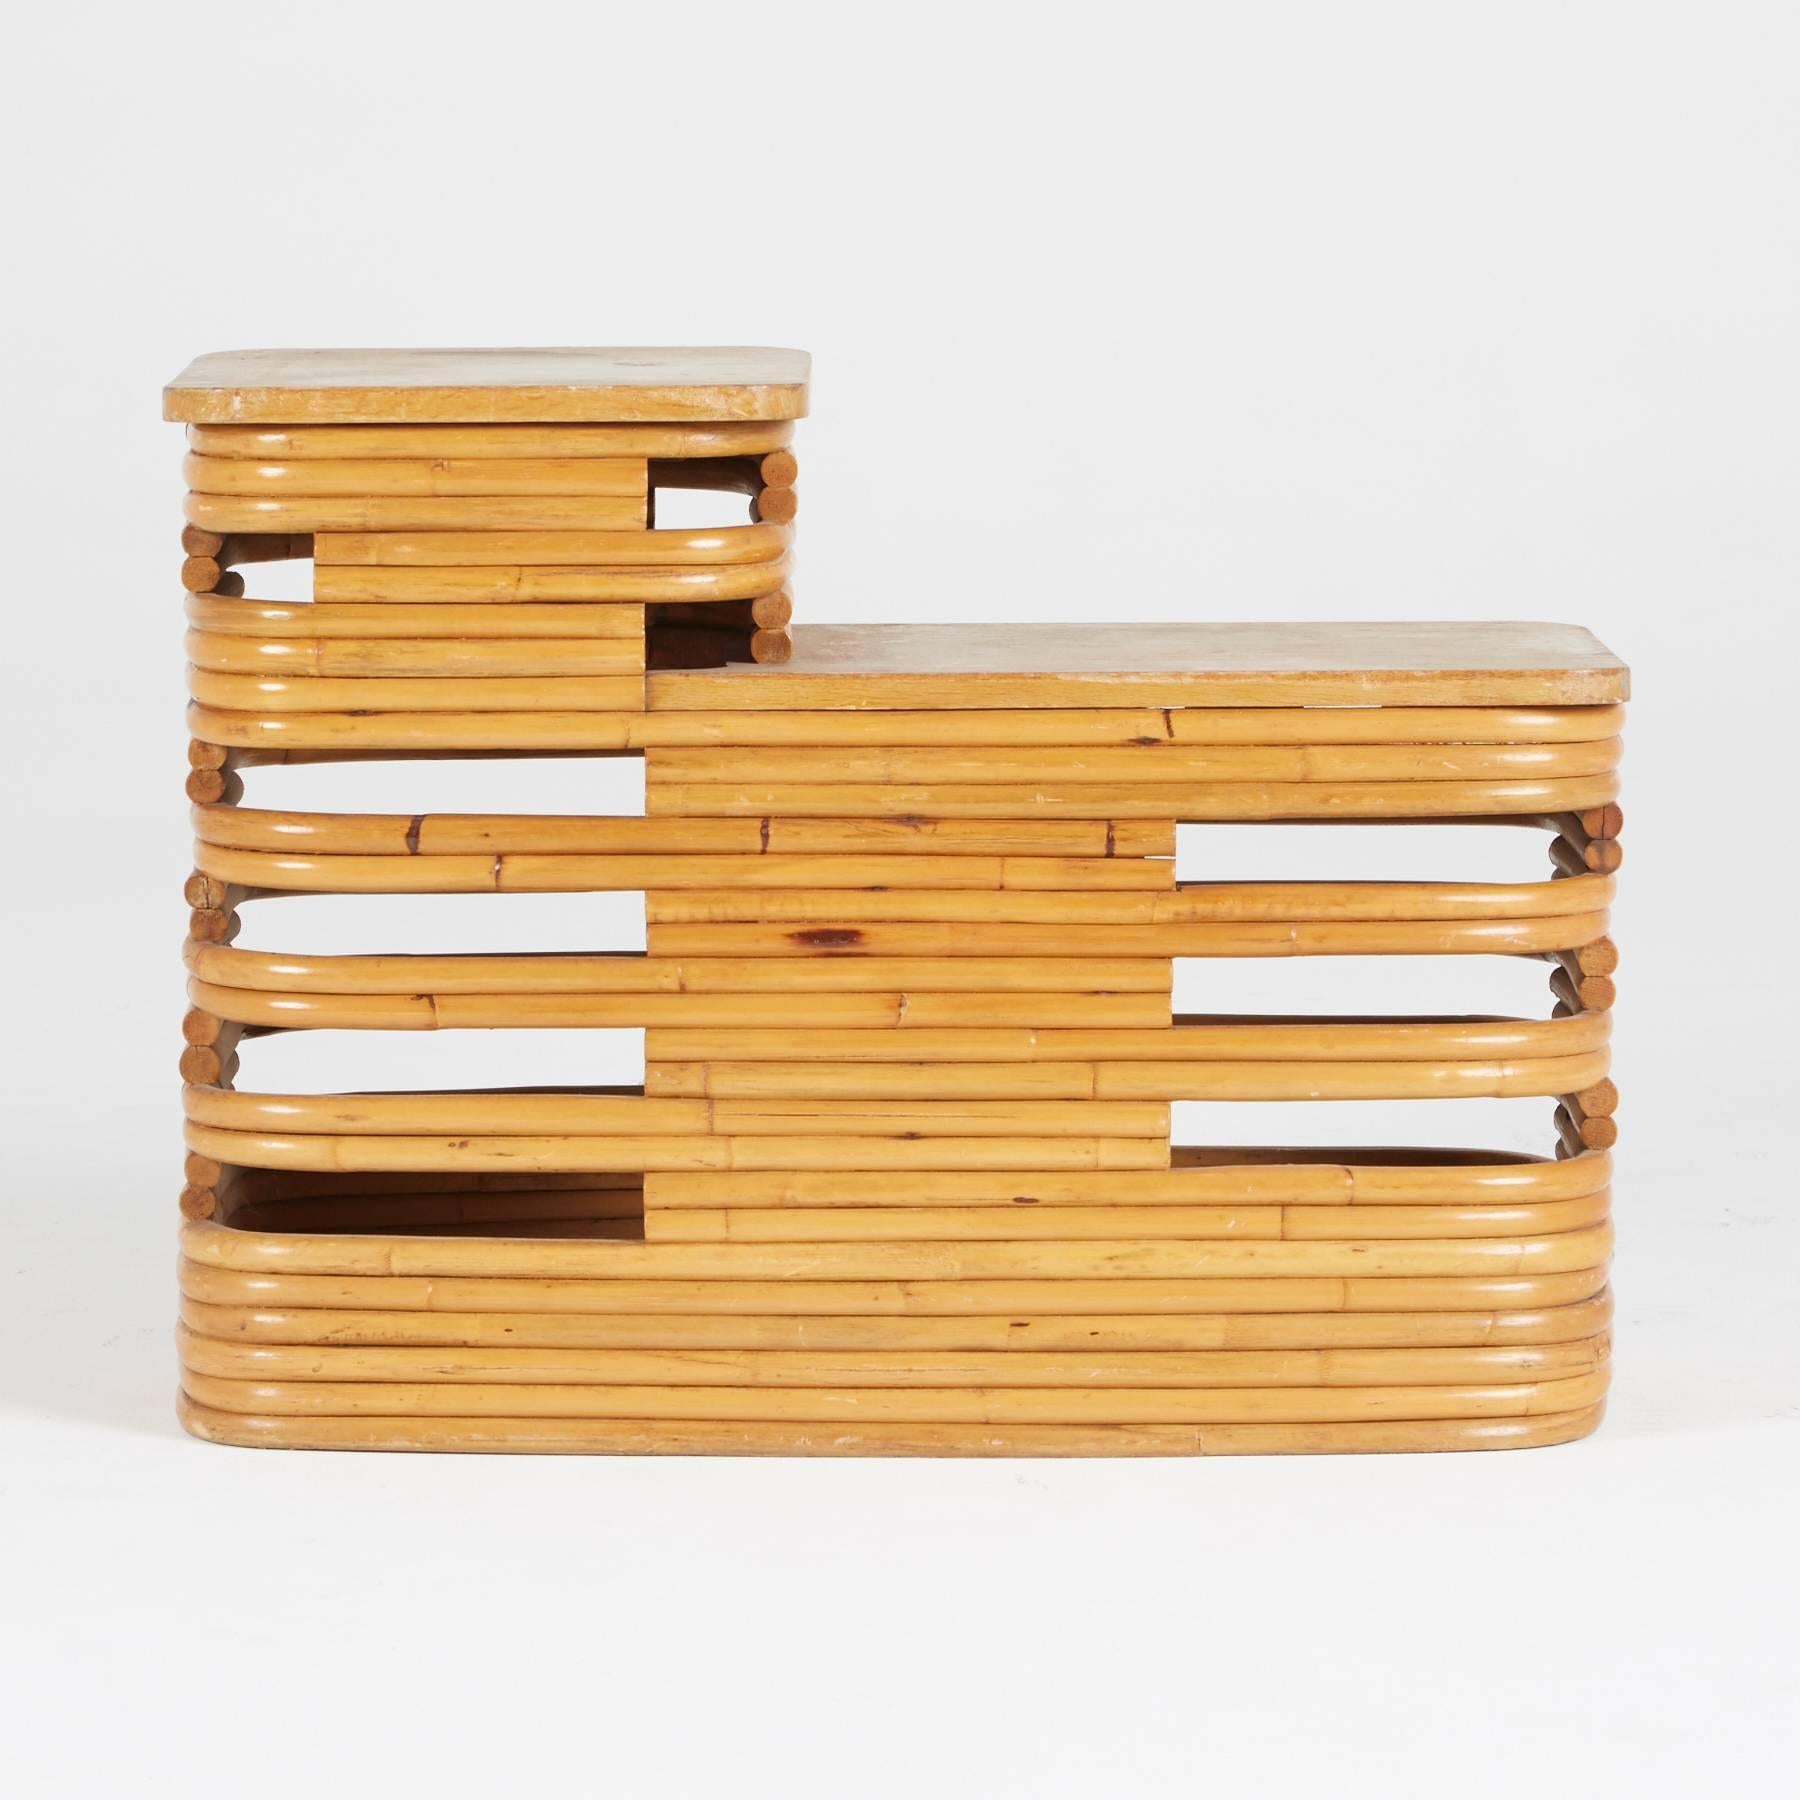 Created by Paul Frankl, 1940s. Constructed of stacked rattan, this two-tiered table can be used as an end table, side table or nightstand. The light, rich color of the wood and rustic yet rounded design makes this piece perfect to style with Art